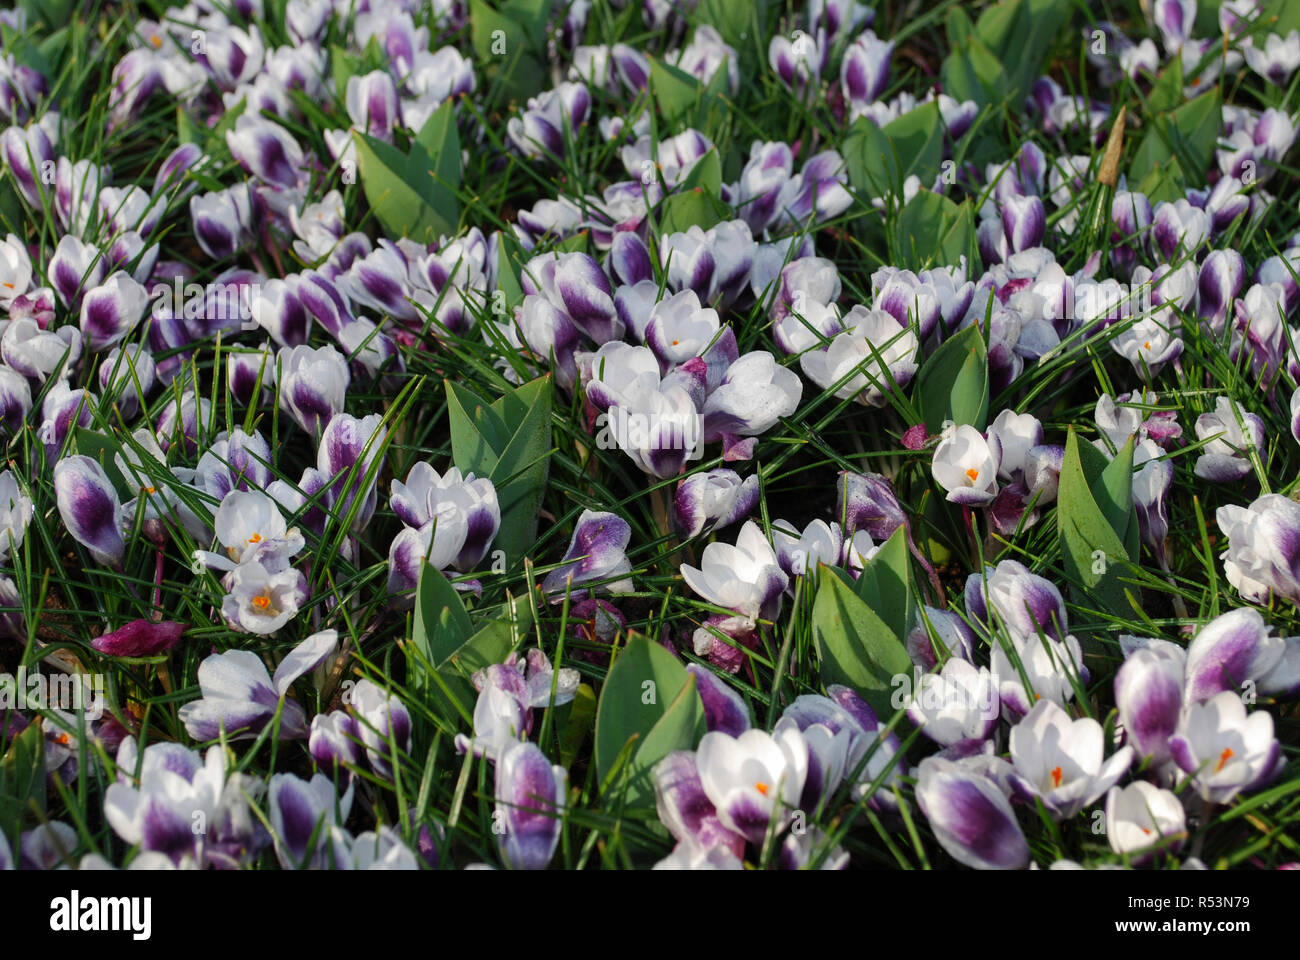 Crocus Prins Claus grown in the park. Spring time in Netherlands. Stock Photo